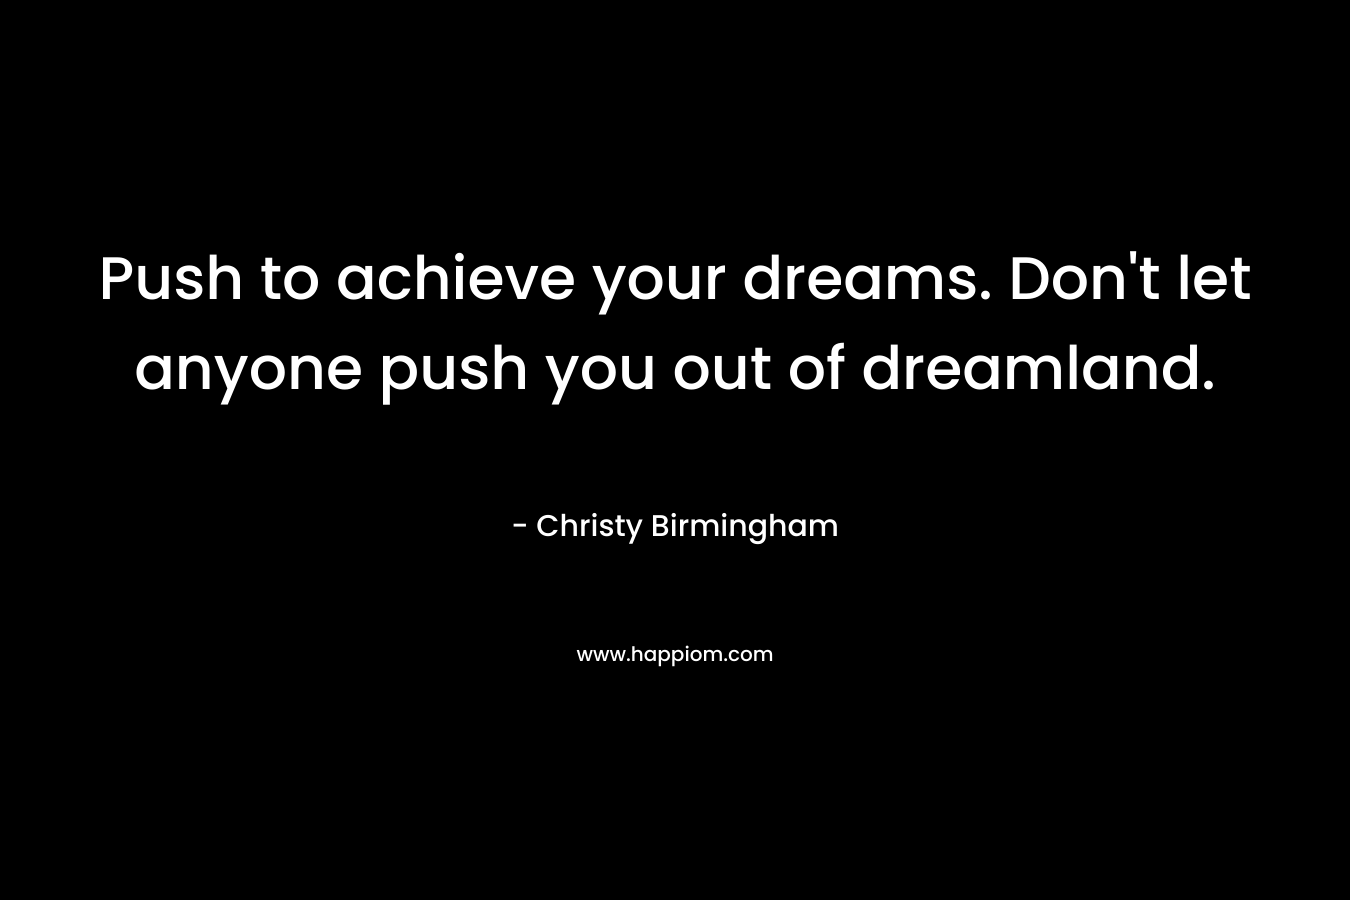 Push to achieve your dreams. Don’t let anyone push you out of dreamland. – Christy Birmingham